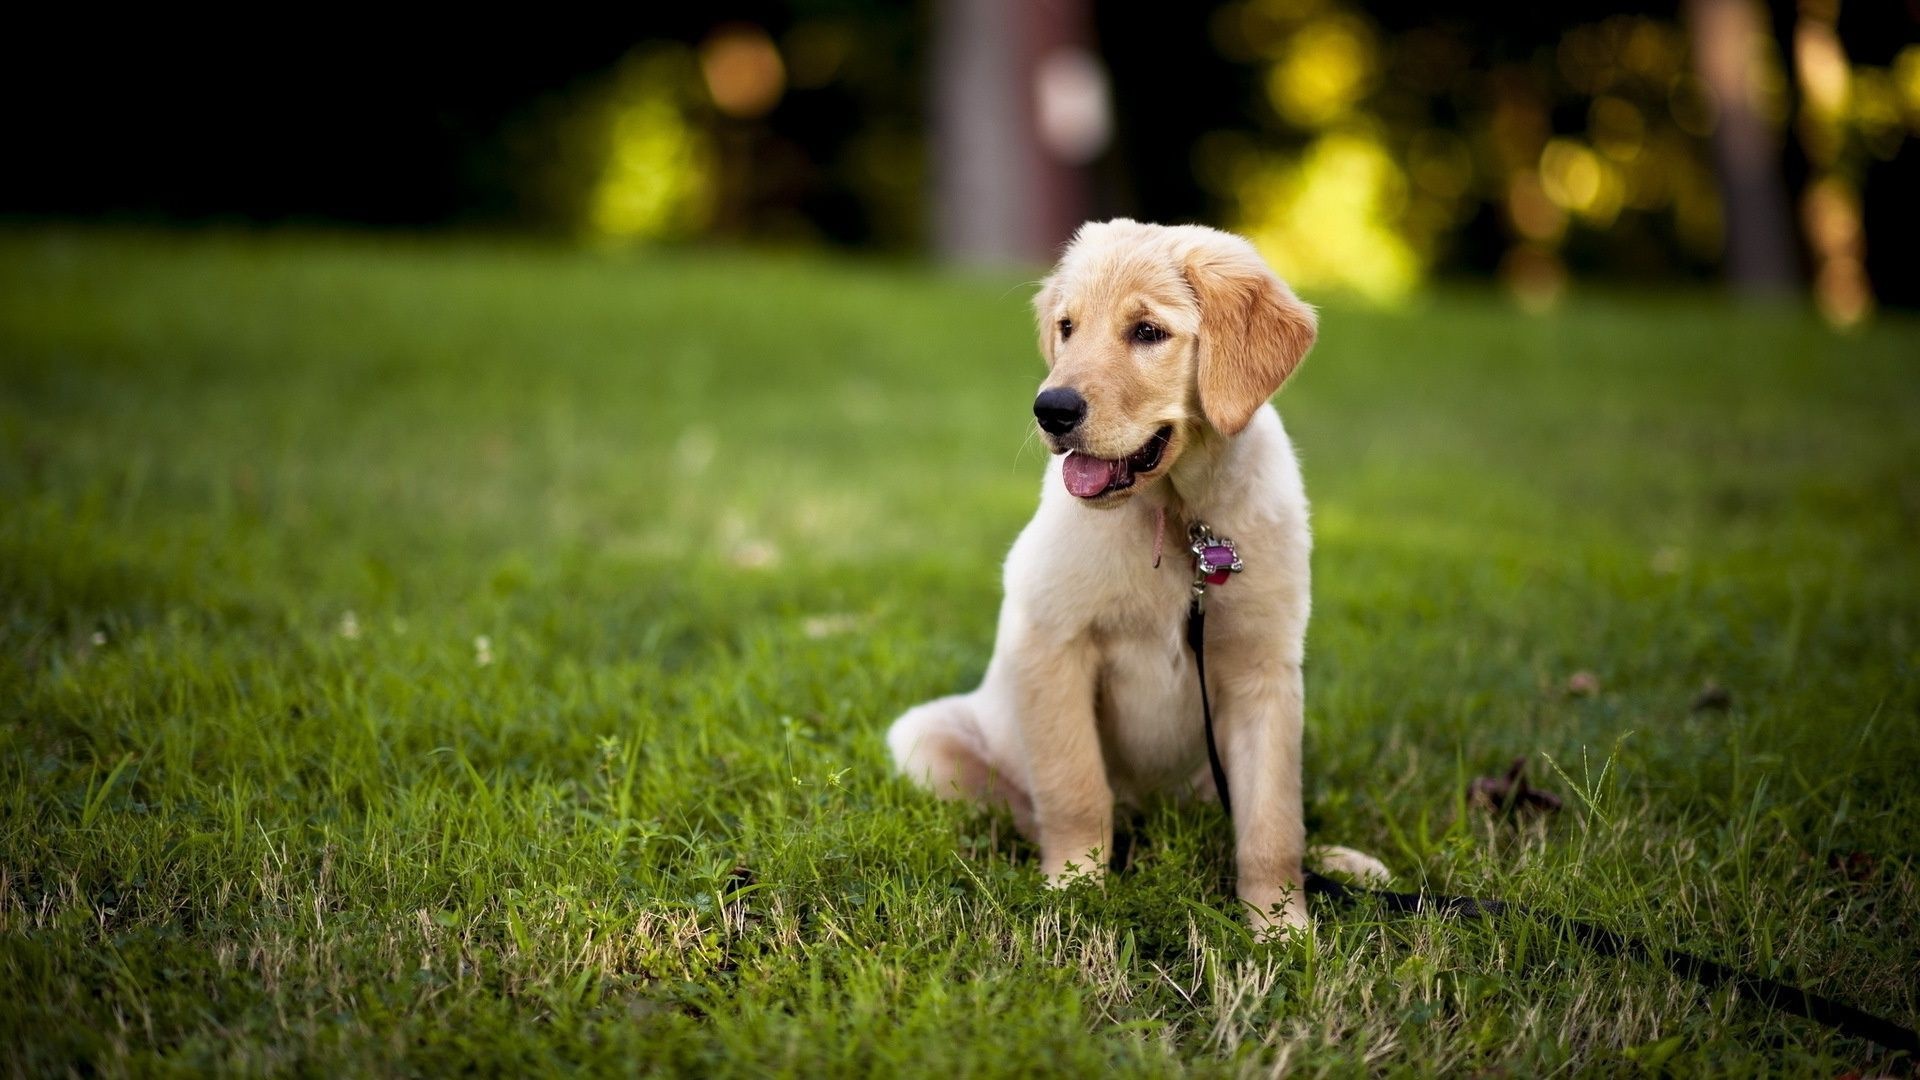 Labs wallpapers, Popular choice, Stunning backgrounds, Canine beauty, 1920x1080 Full HD Desktop